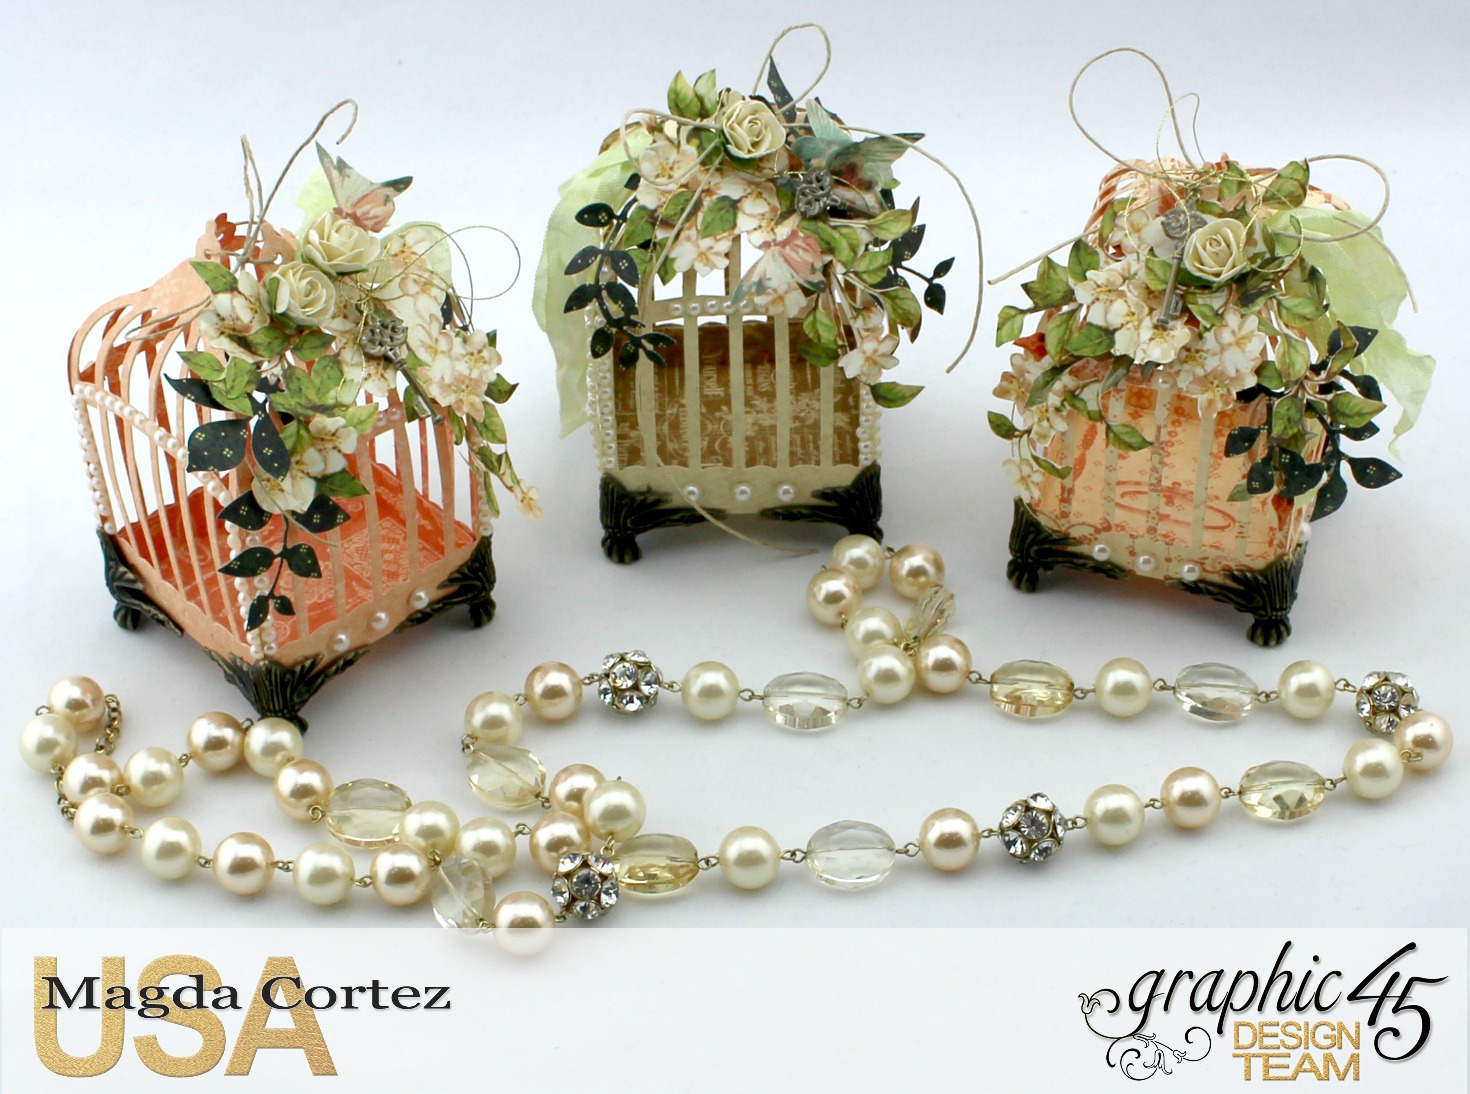 3D Birdcages Simply 45-Wedding Favor- Secret Garden By Magda Cortez, Product By G45, Photo 01 of 06, Project with Tutorial.jpg